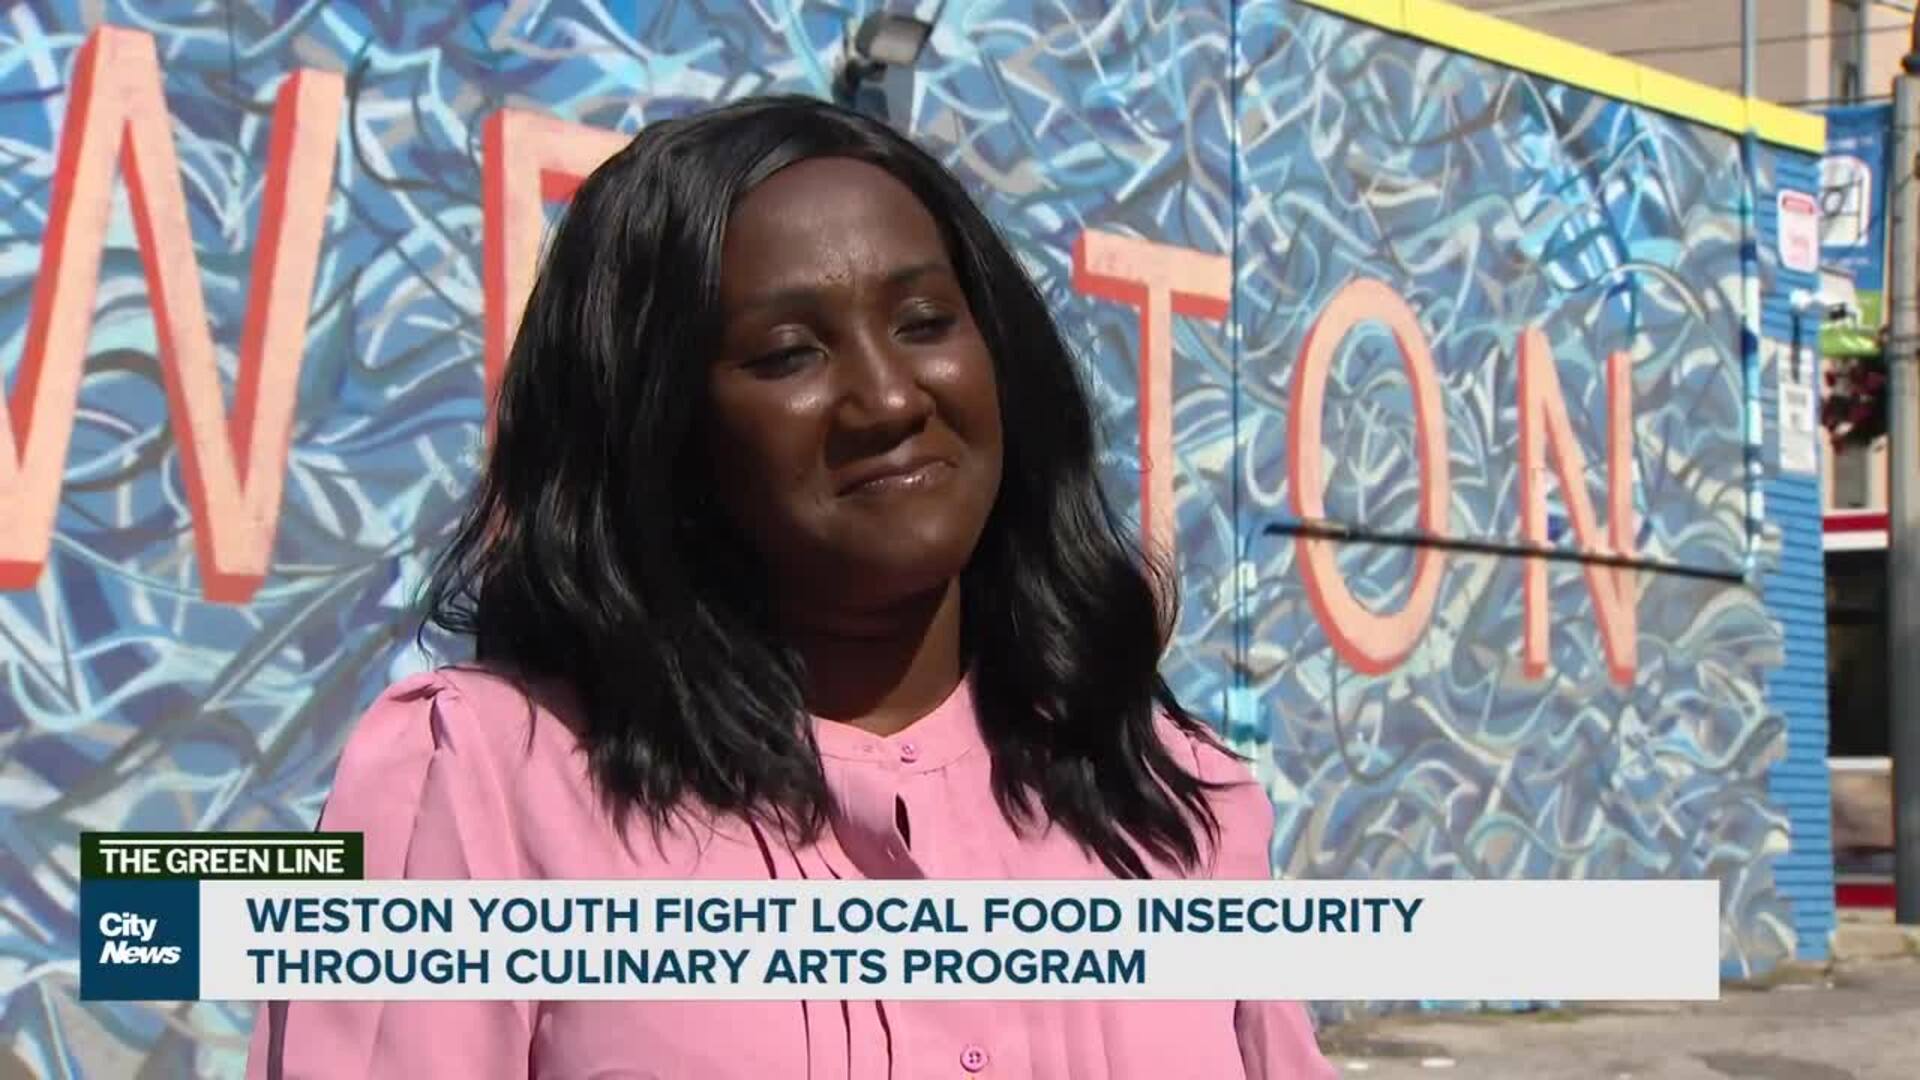 Weston youth fight local food insecurity through culinary arts program